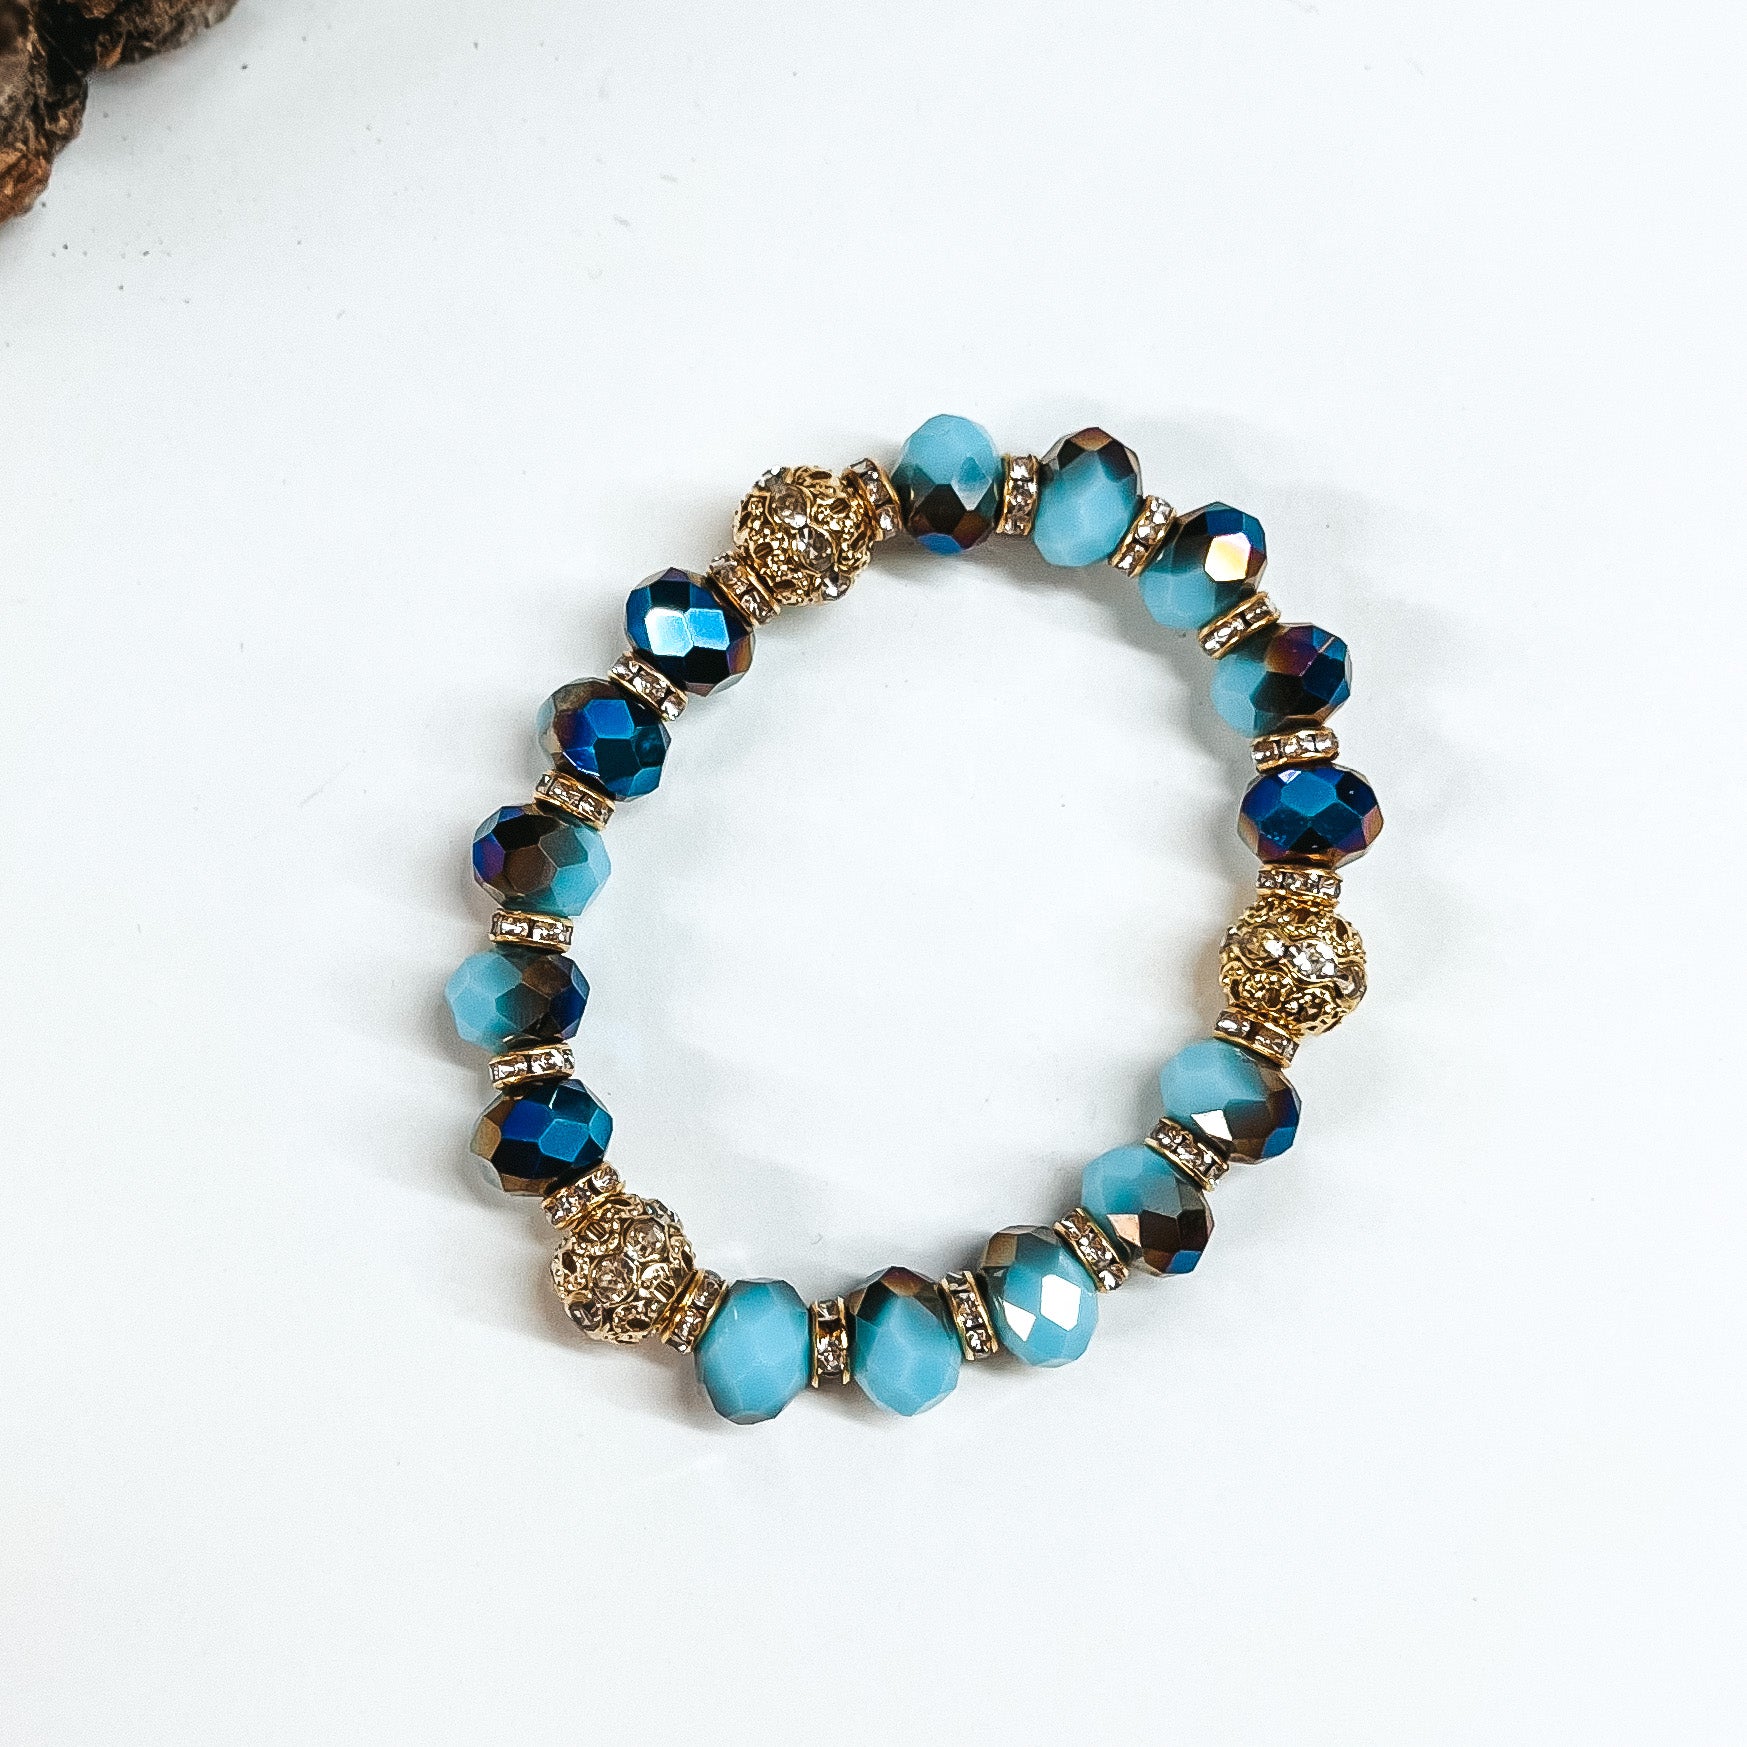 This is blue mix crystal beaded bracelets with gold spacers.  The gold spacers have clear crystals in them and there are three gold and  crystals beads.This bracelet is taken on white background.